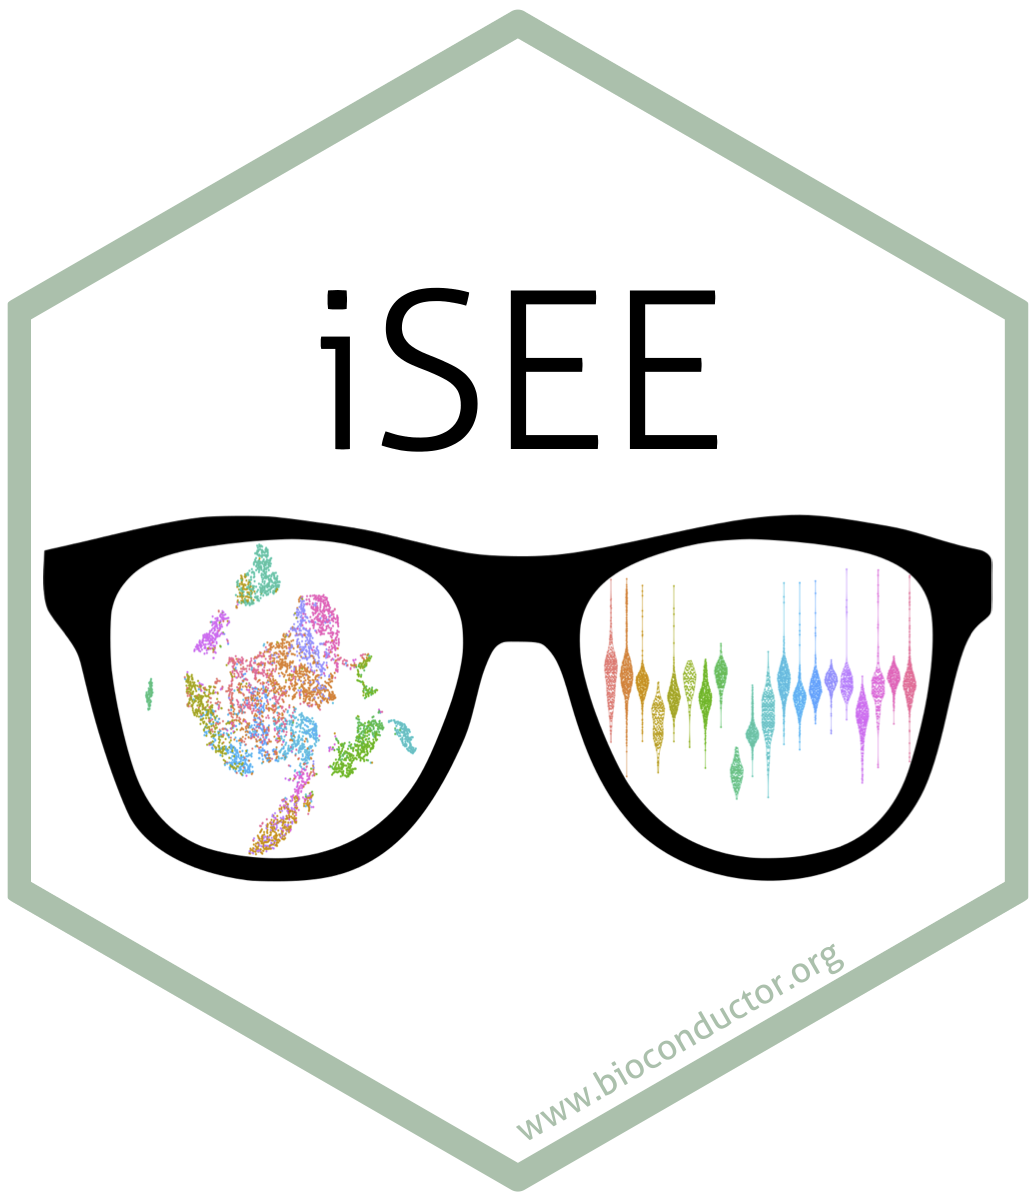 powered by iSEE